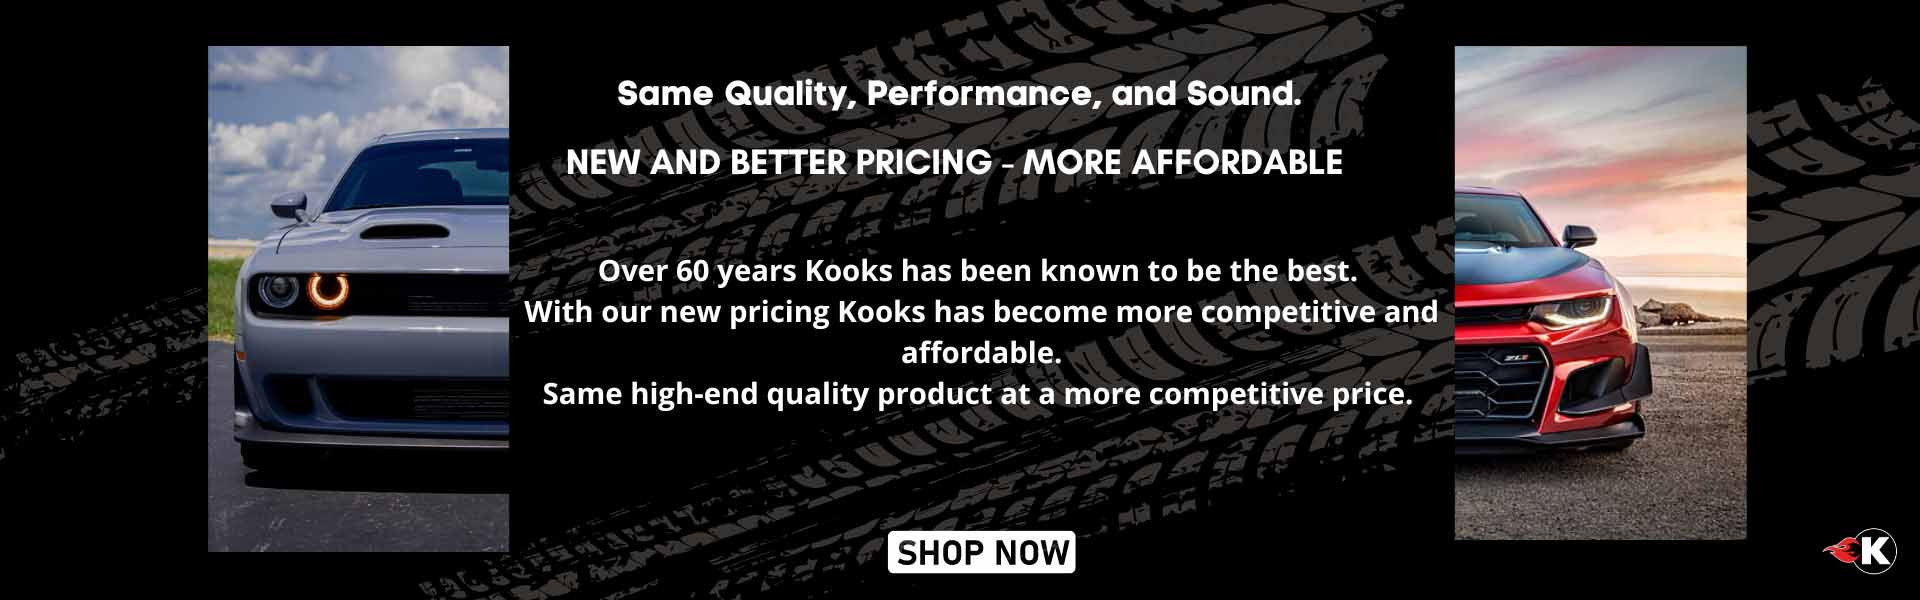 kooks headers 2022 new better pricing quality affordable parts shop online